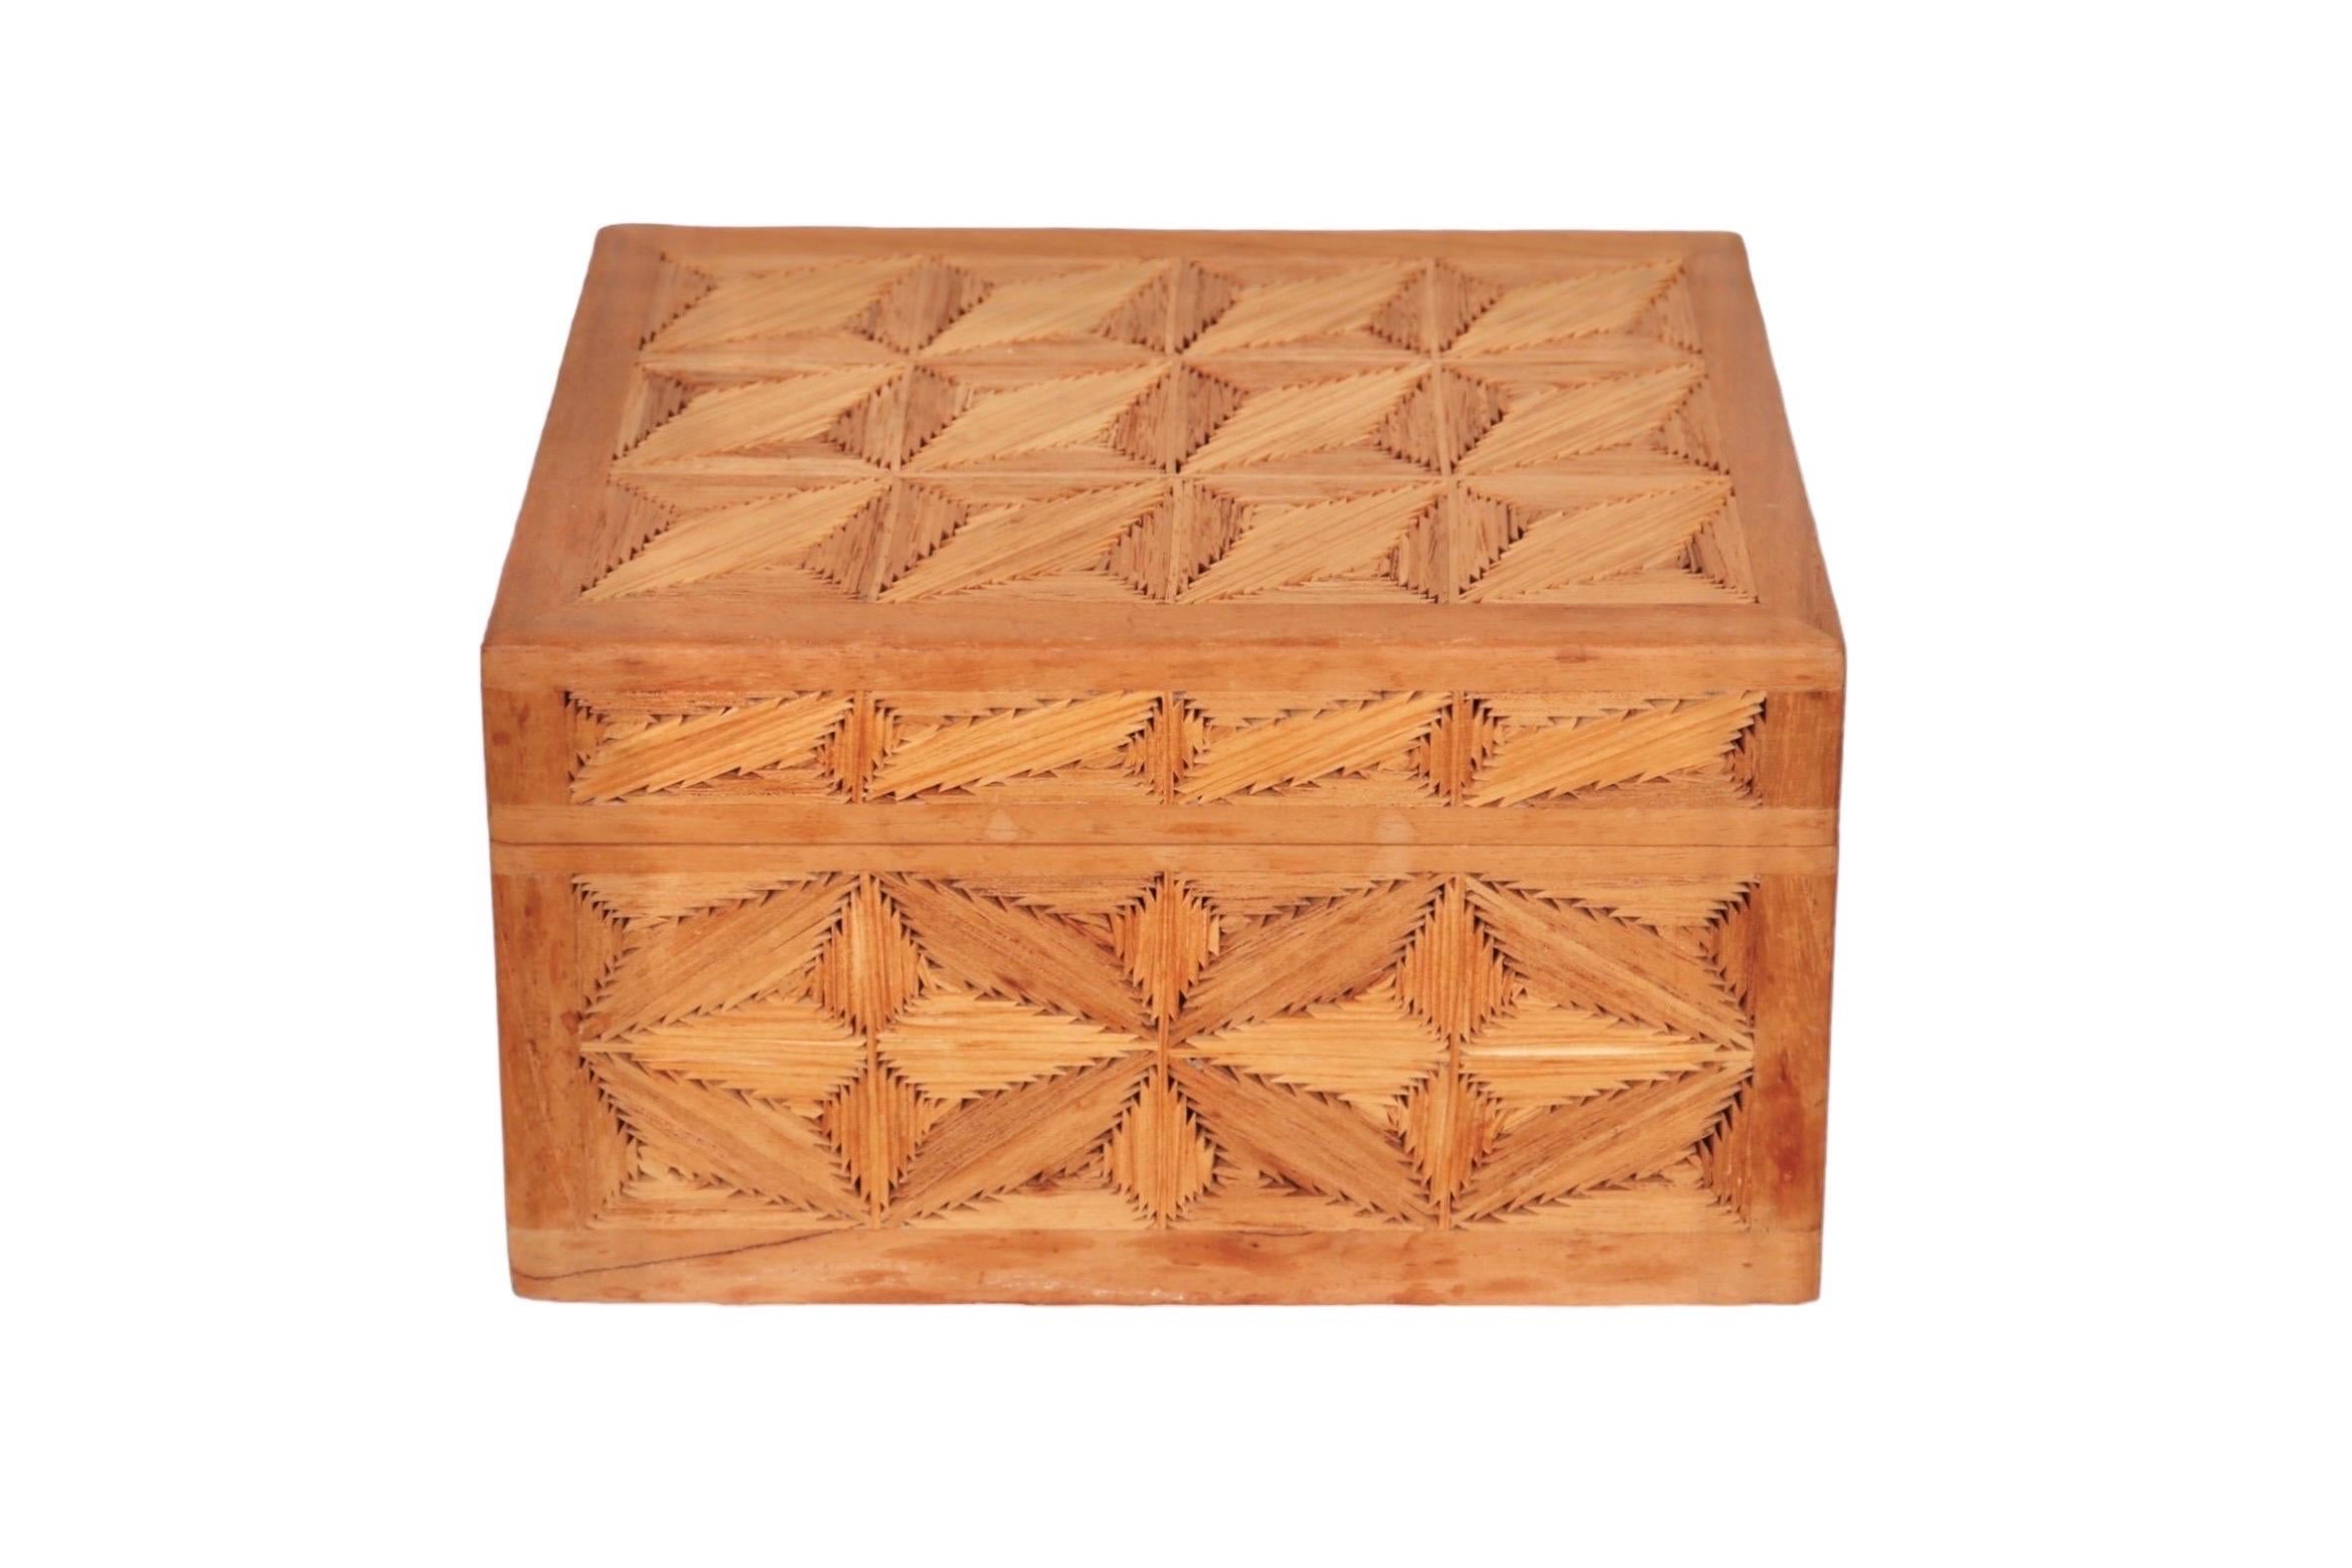 A handmade trinket box made of wood. Each side is inlaid with opposing wooden diamonds made of slivers of angled wood to create a simple geometric pattern. The lid opens with two hinges. 